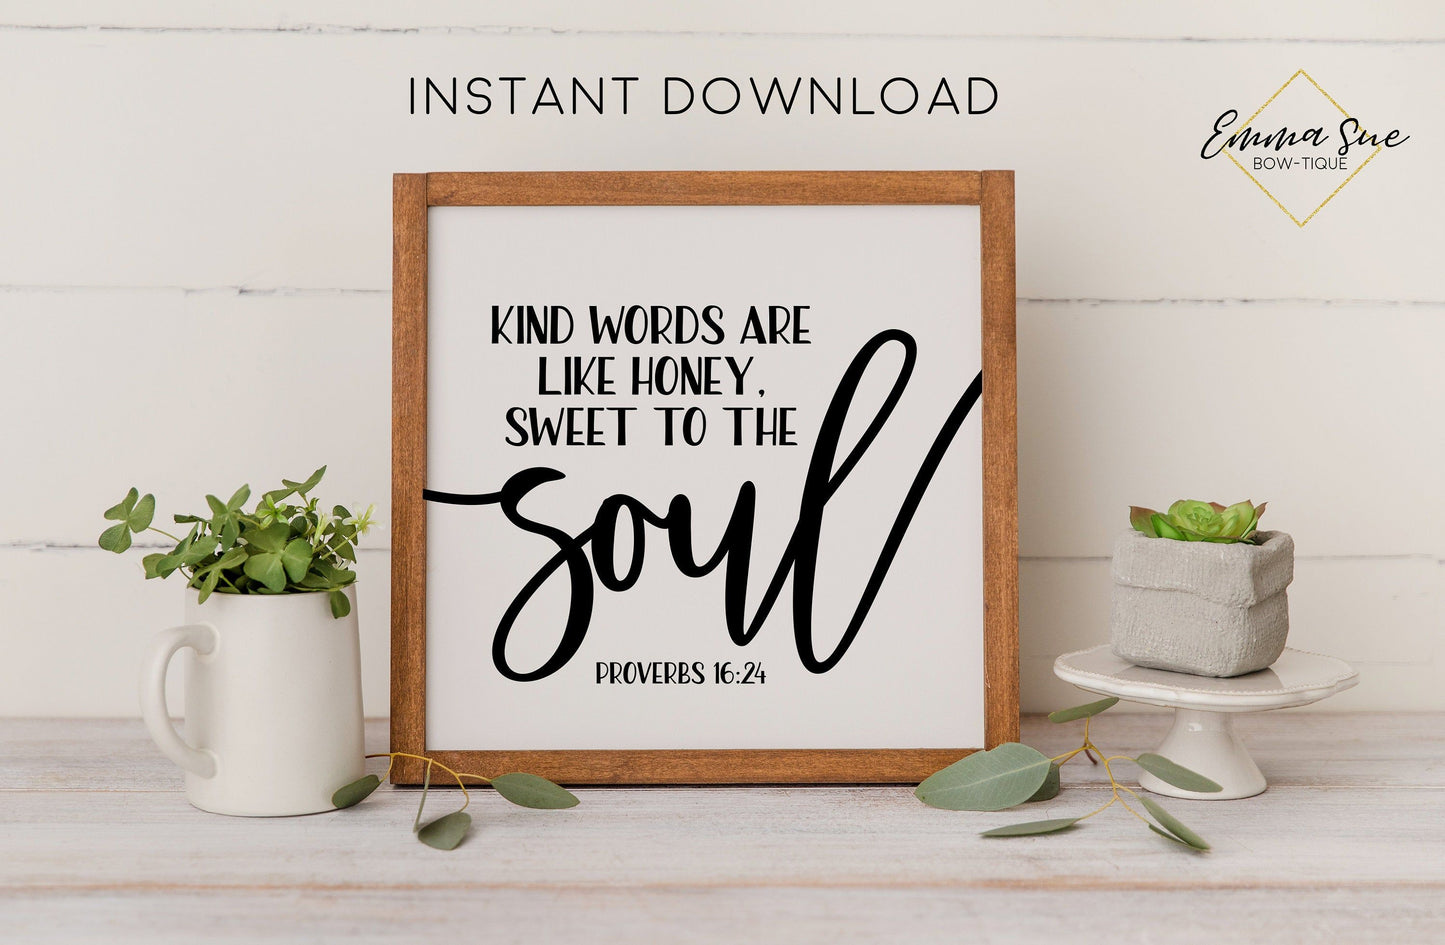 Kind words are like honey sweet to the soul Proverbs 16:24 Bible Verse Printable Art Sign Digital File